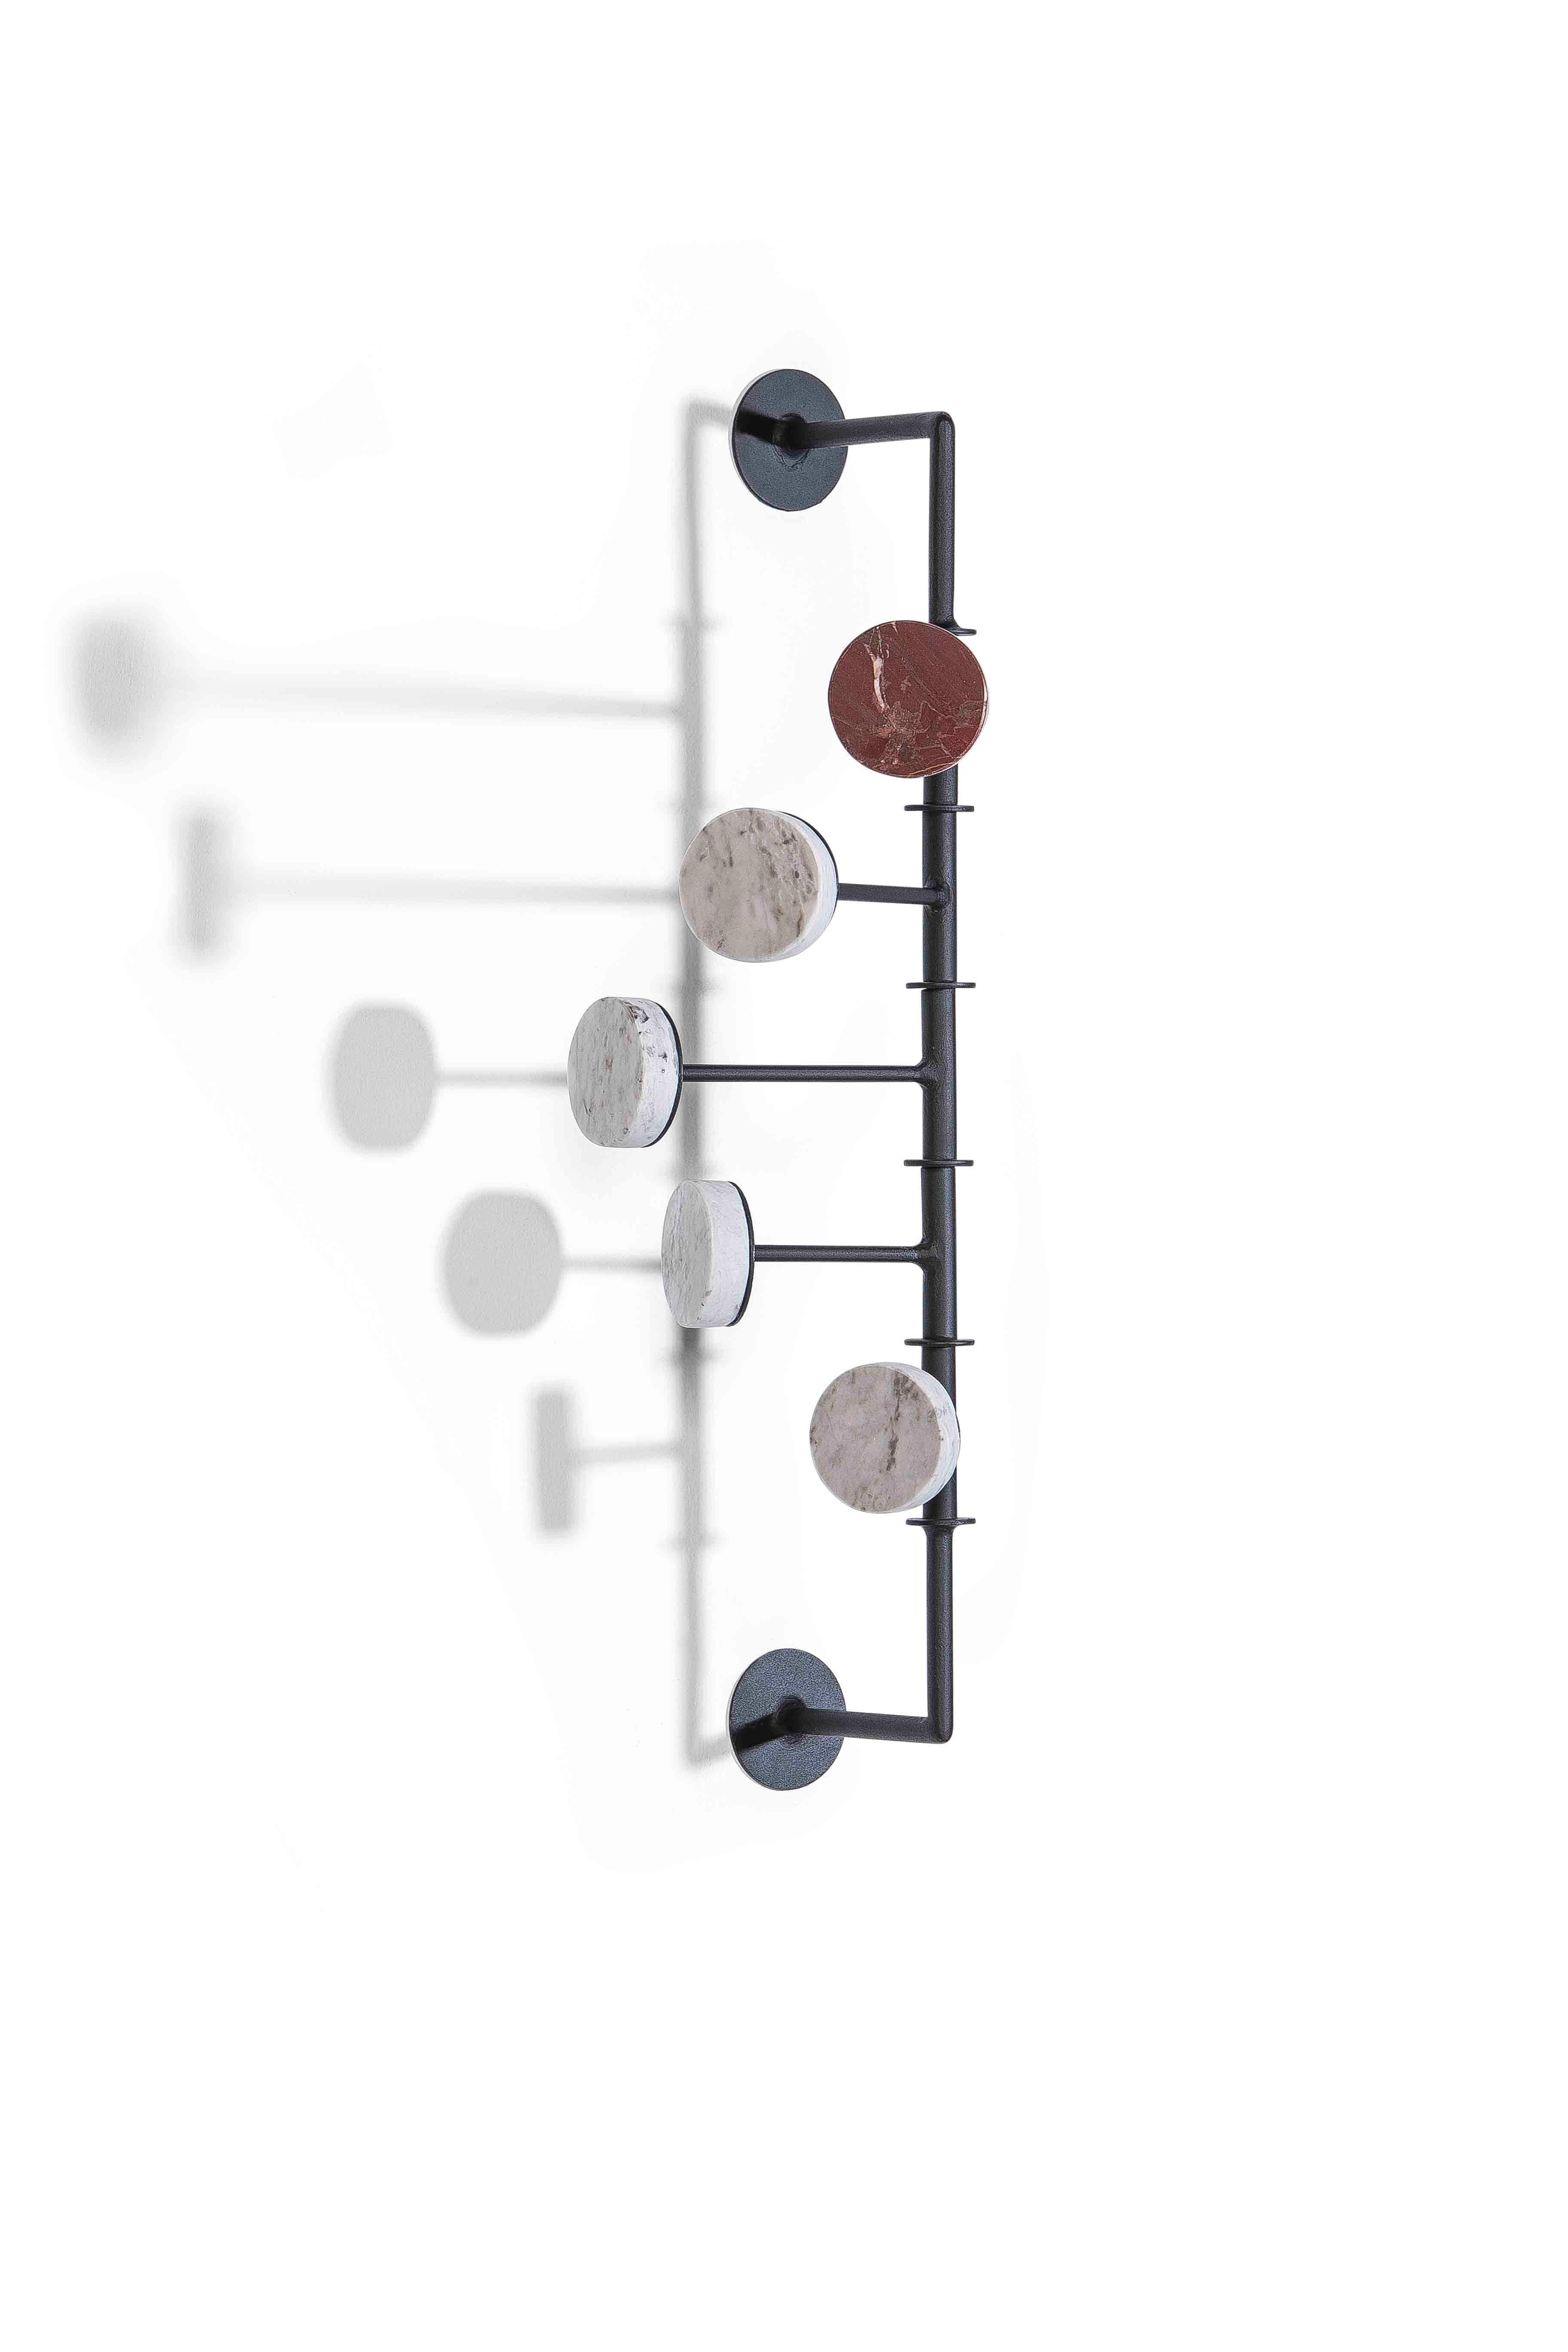 Articulated wall coat or hat rack, developed with Brazilian stones from the disposal of large marble industries. To remember the issue of sustainability, we always keep a stone different from the others, in order to perpetuate the issue of